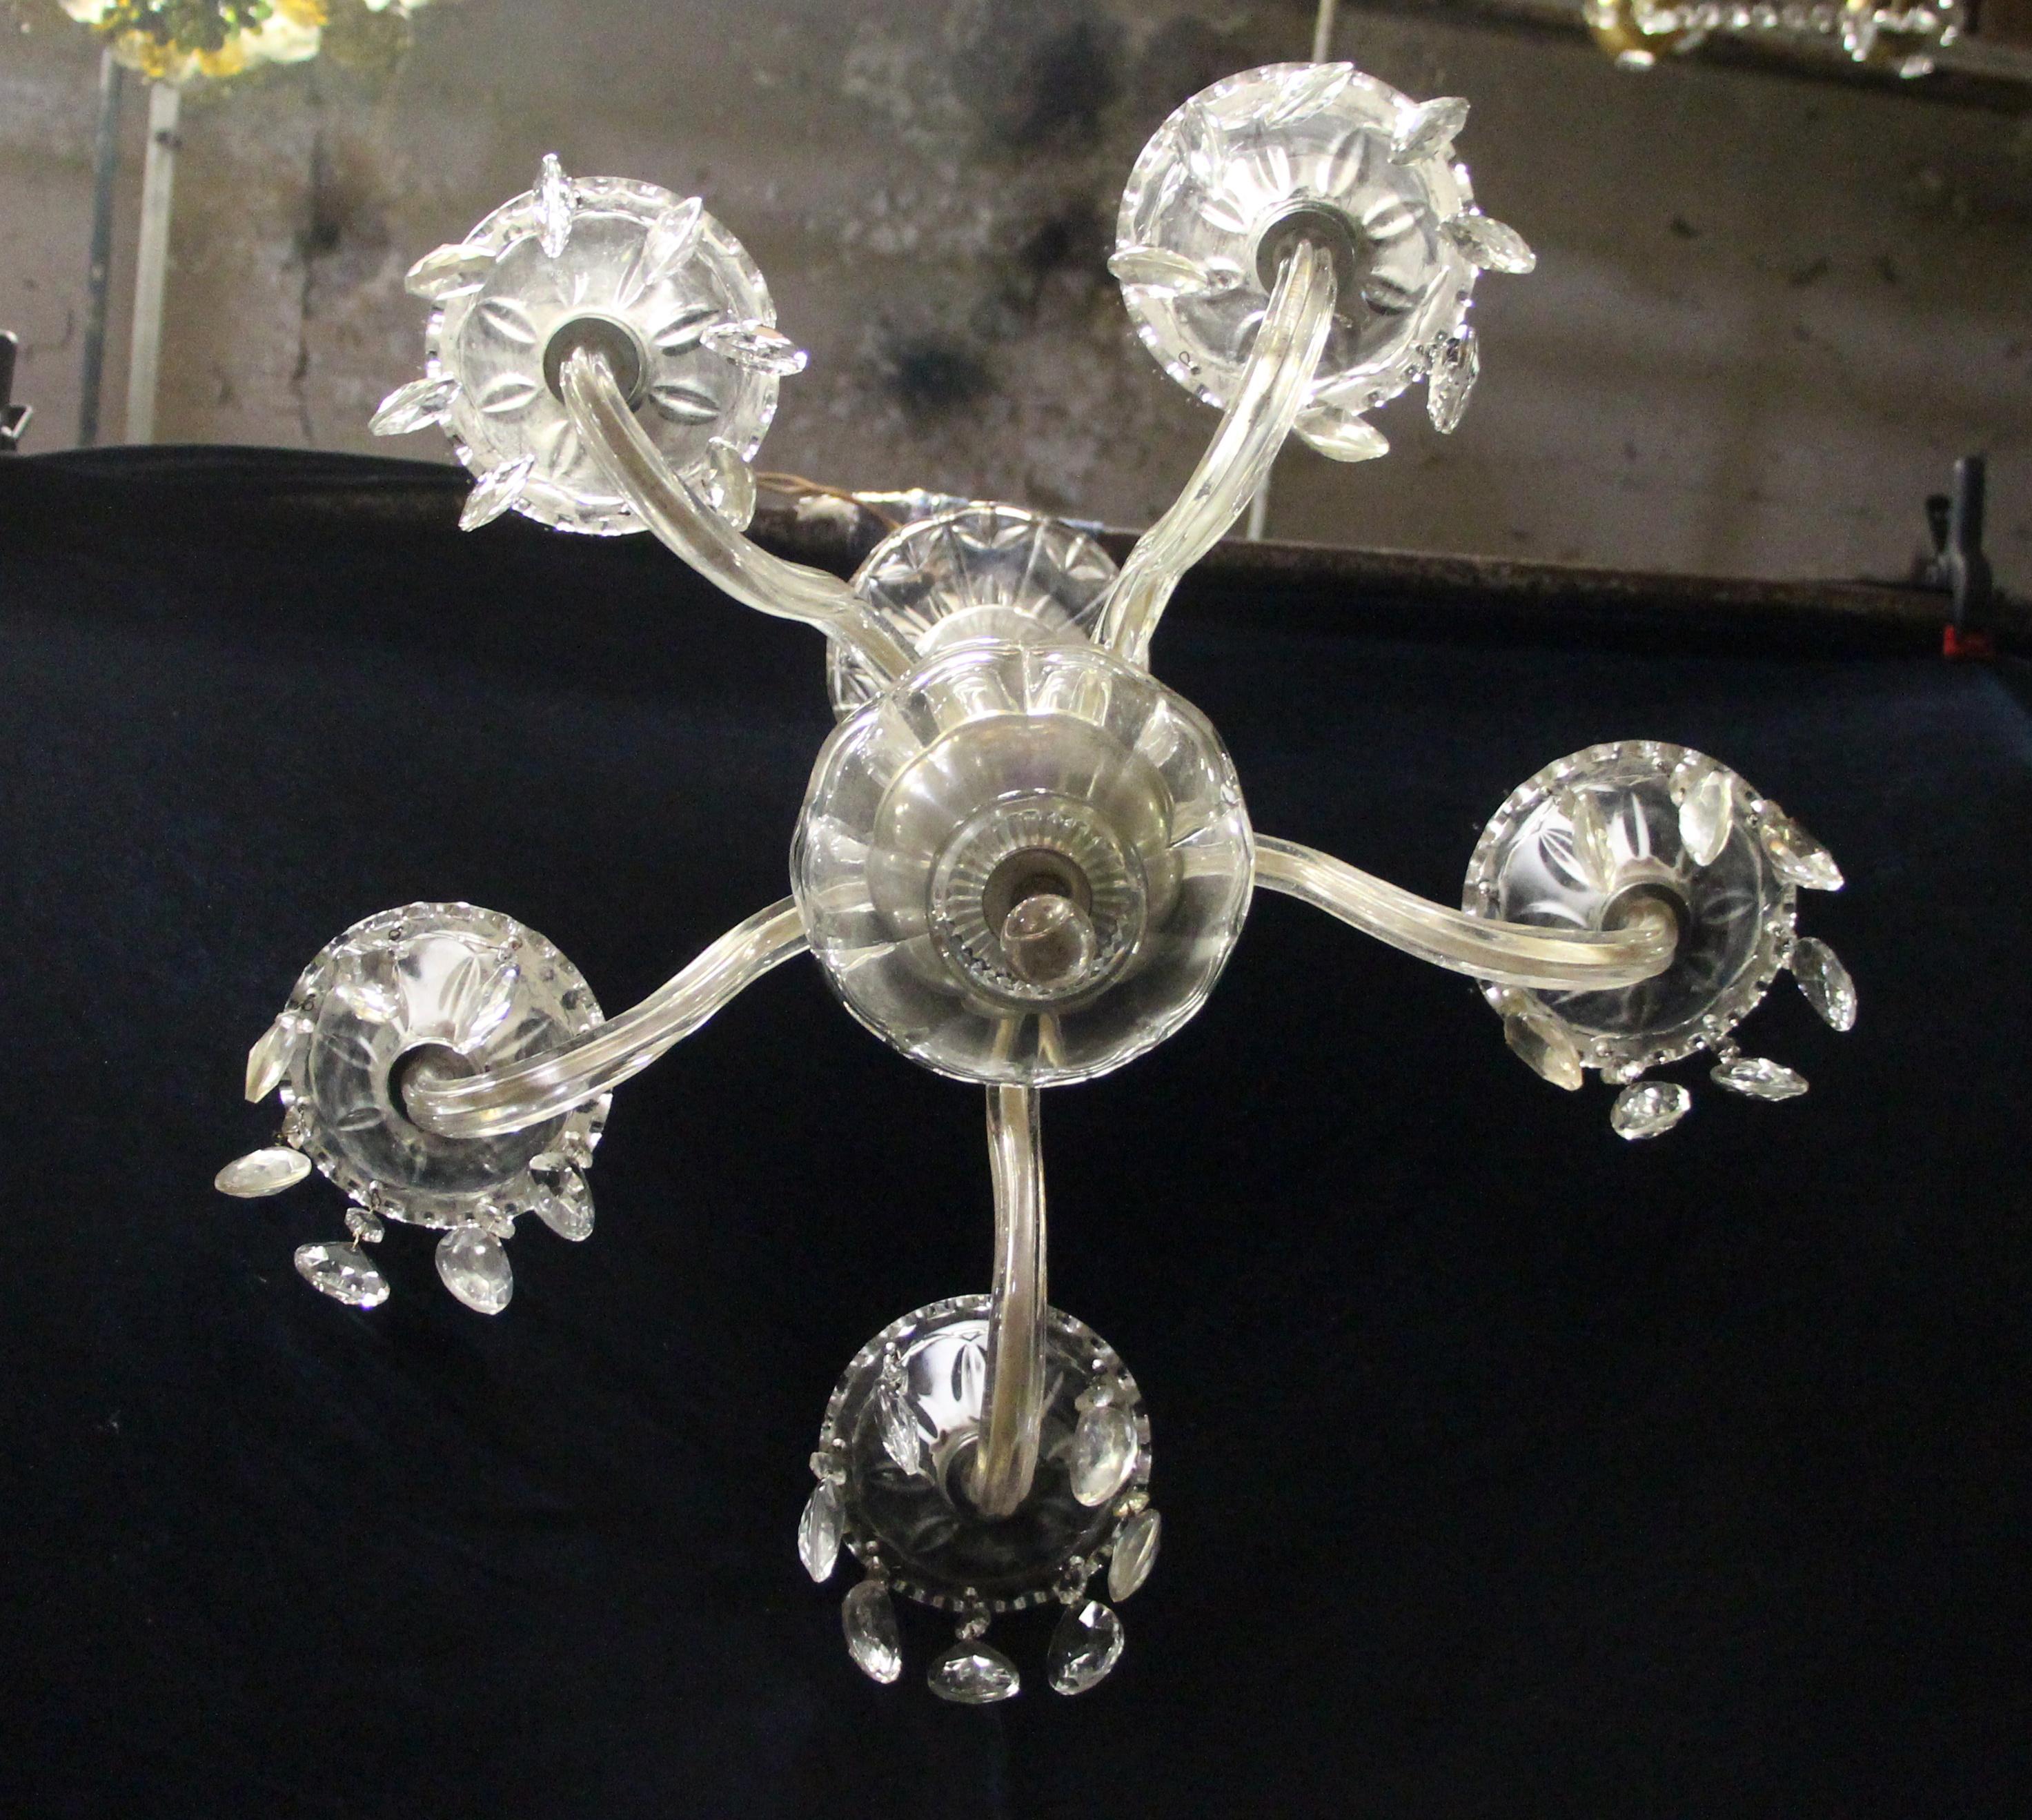 Mid-20th Century 1940s Etched Glass 5 Light Crystal Chandelier w/ Pressed Bobeches